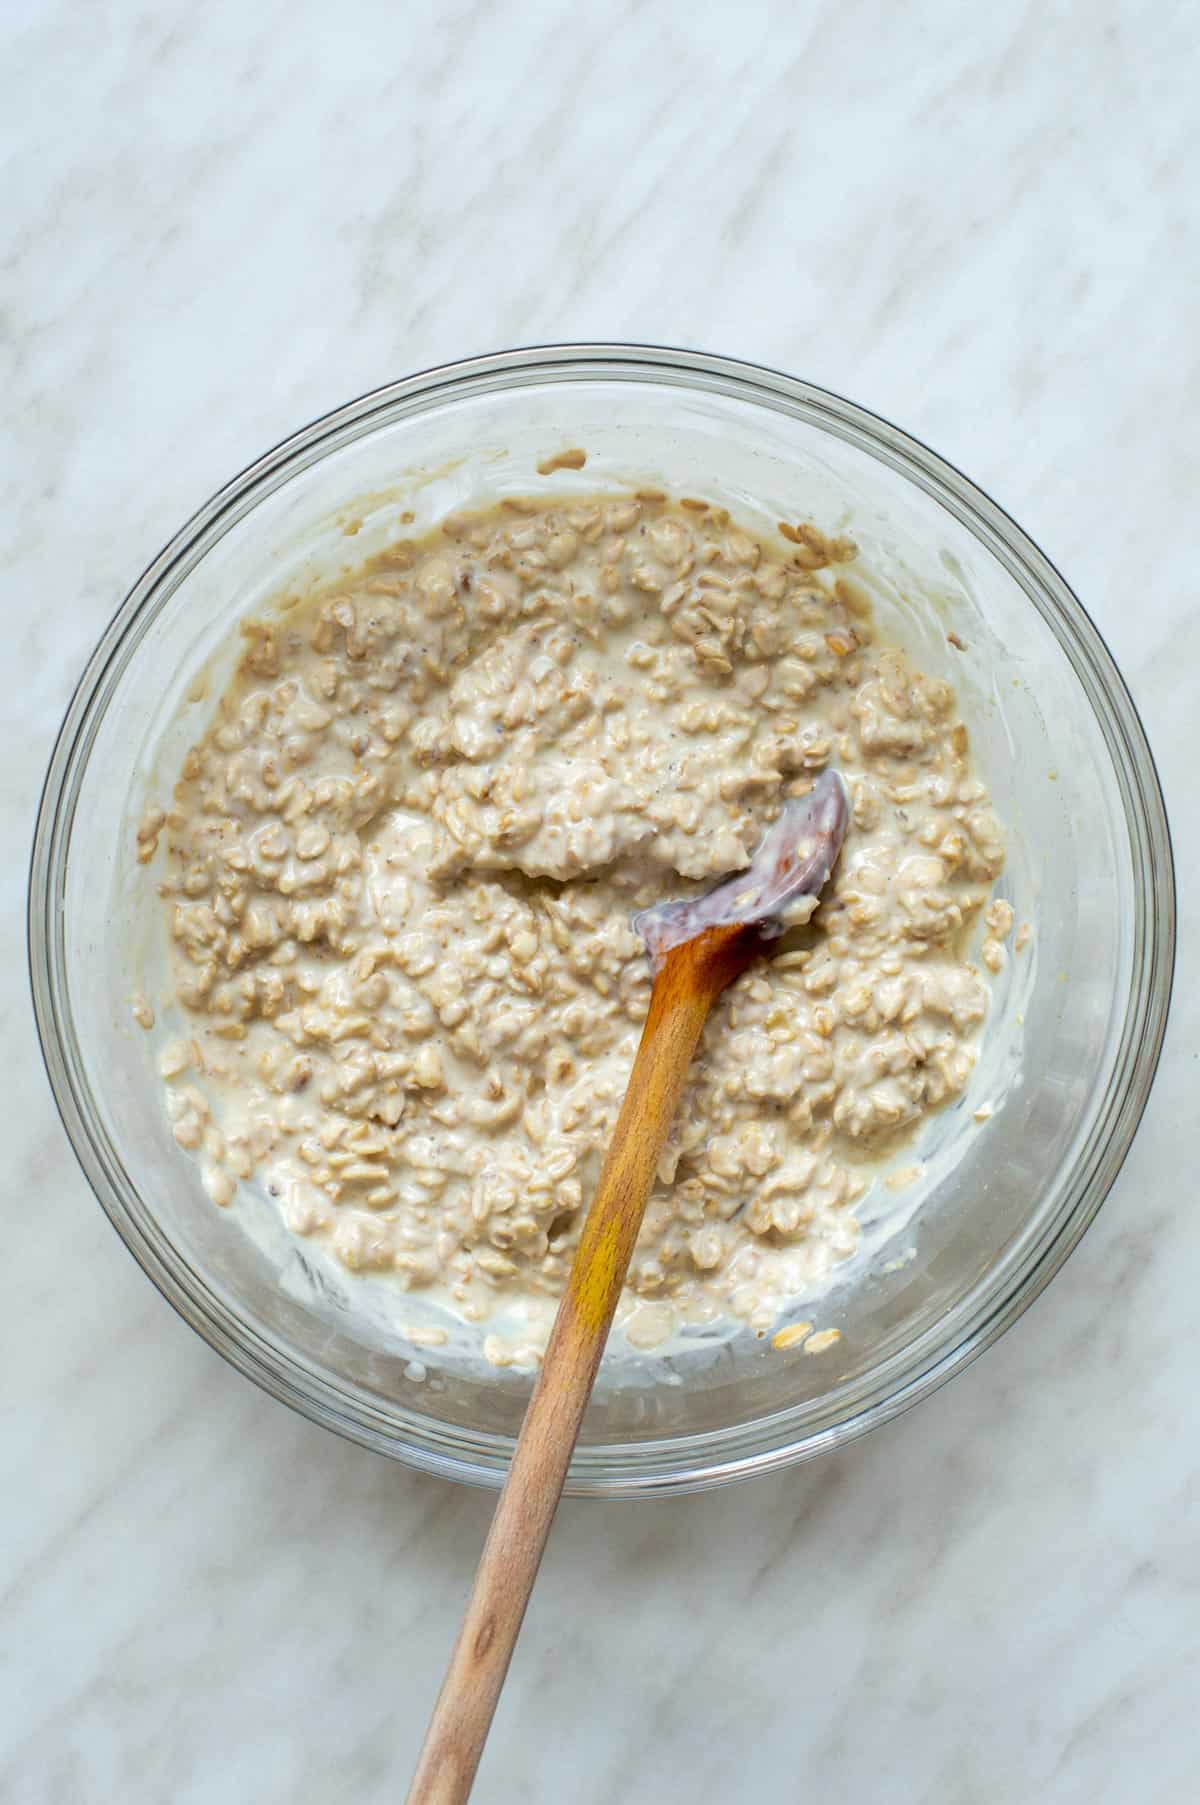 Overnight oats soaking in a large bowl with a wooden spoon in it.